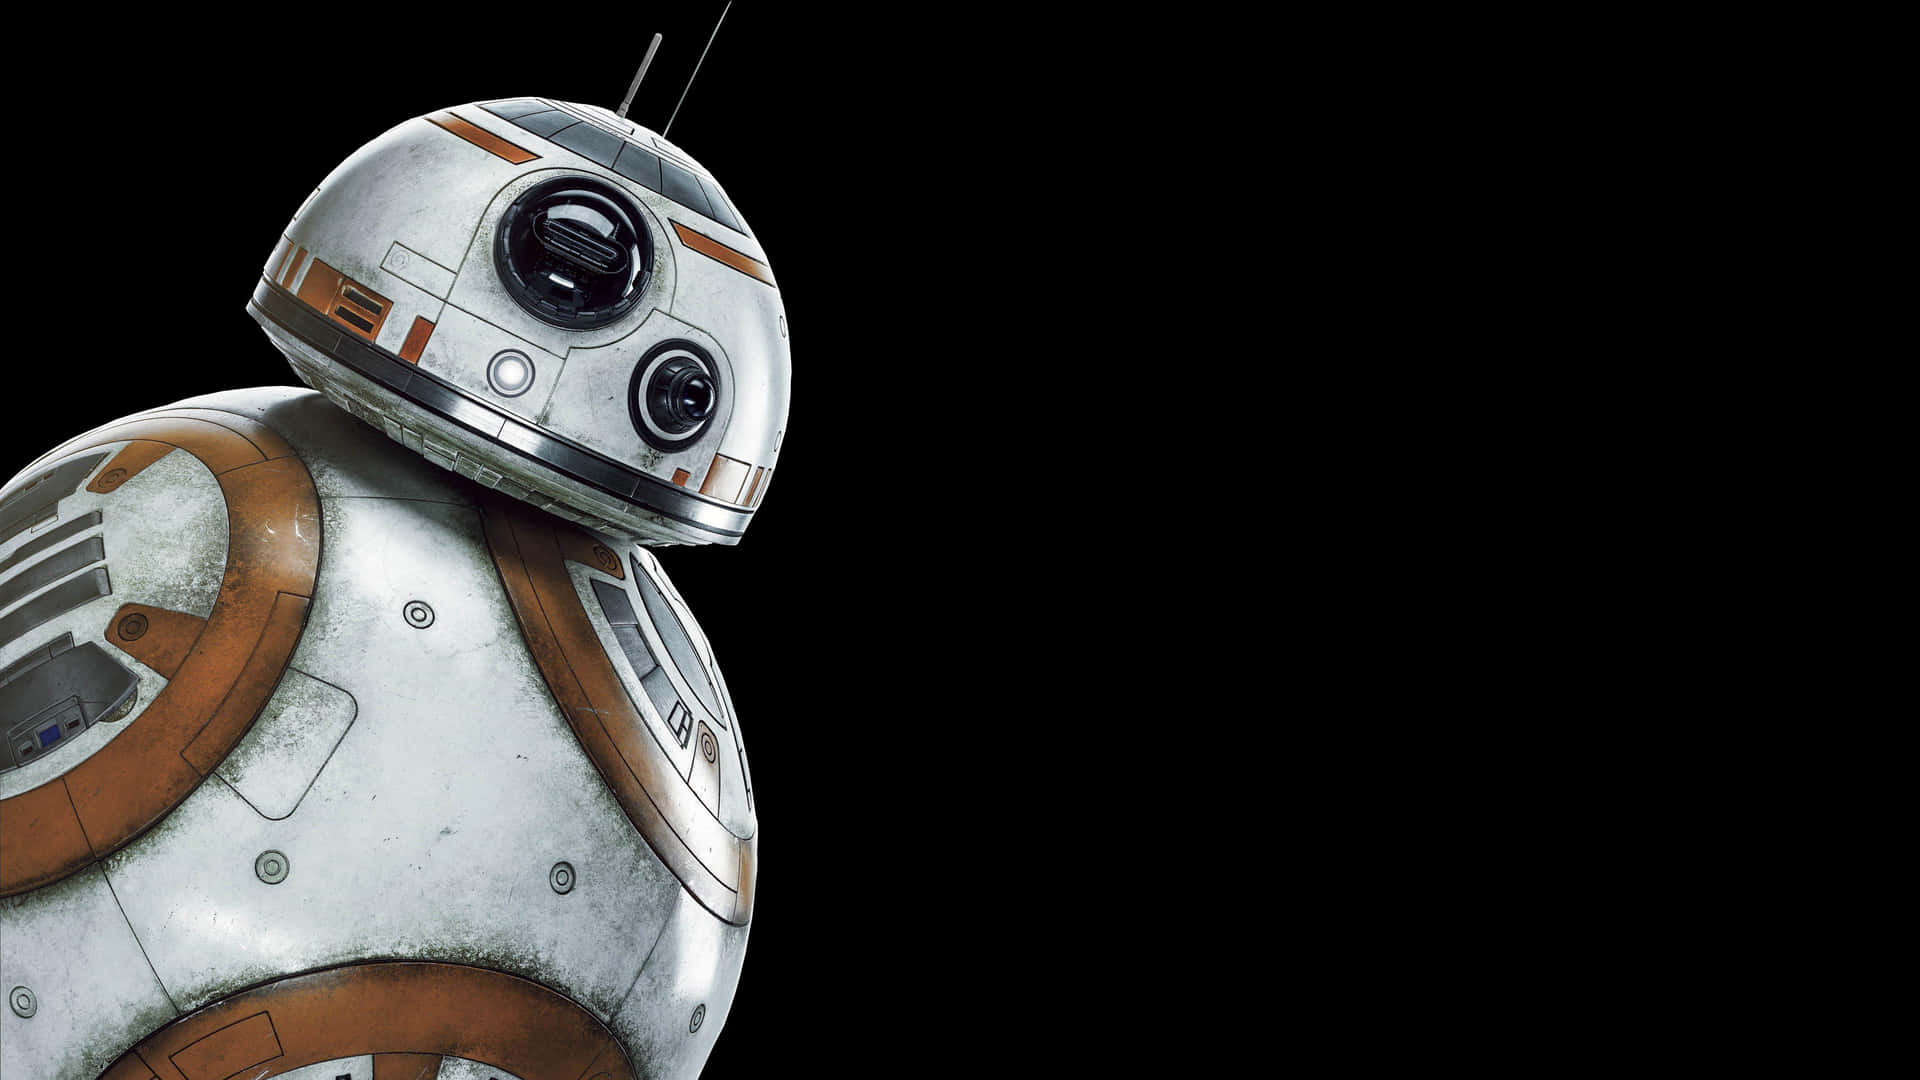 The Force is strong with BB-8! Wallpaper